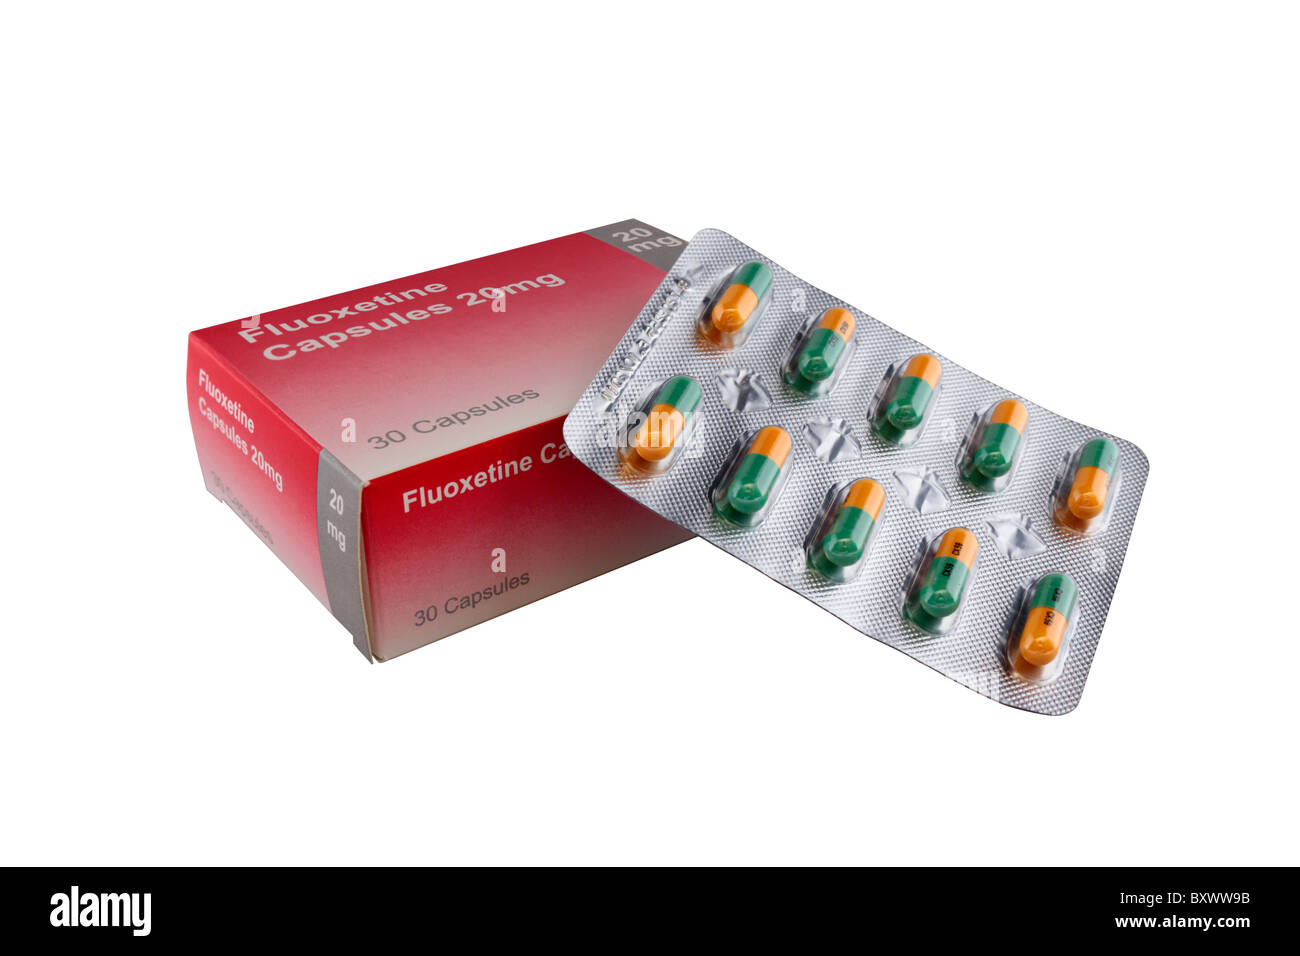 A box of 20mg Fluoxetine capsules with one sheet of capsules out of the box Stock Photo